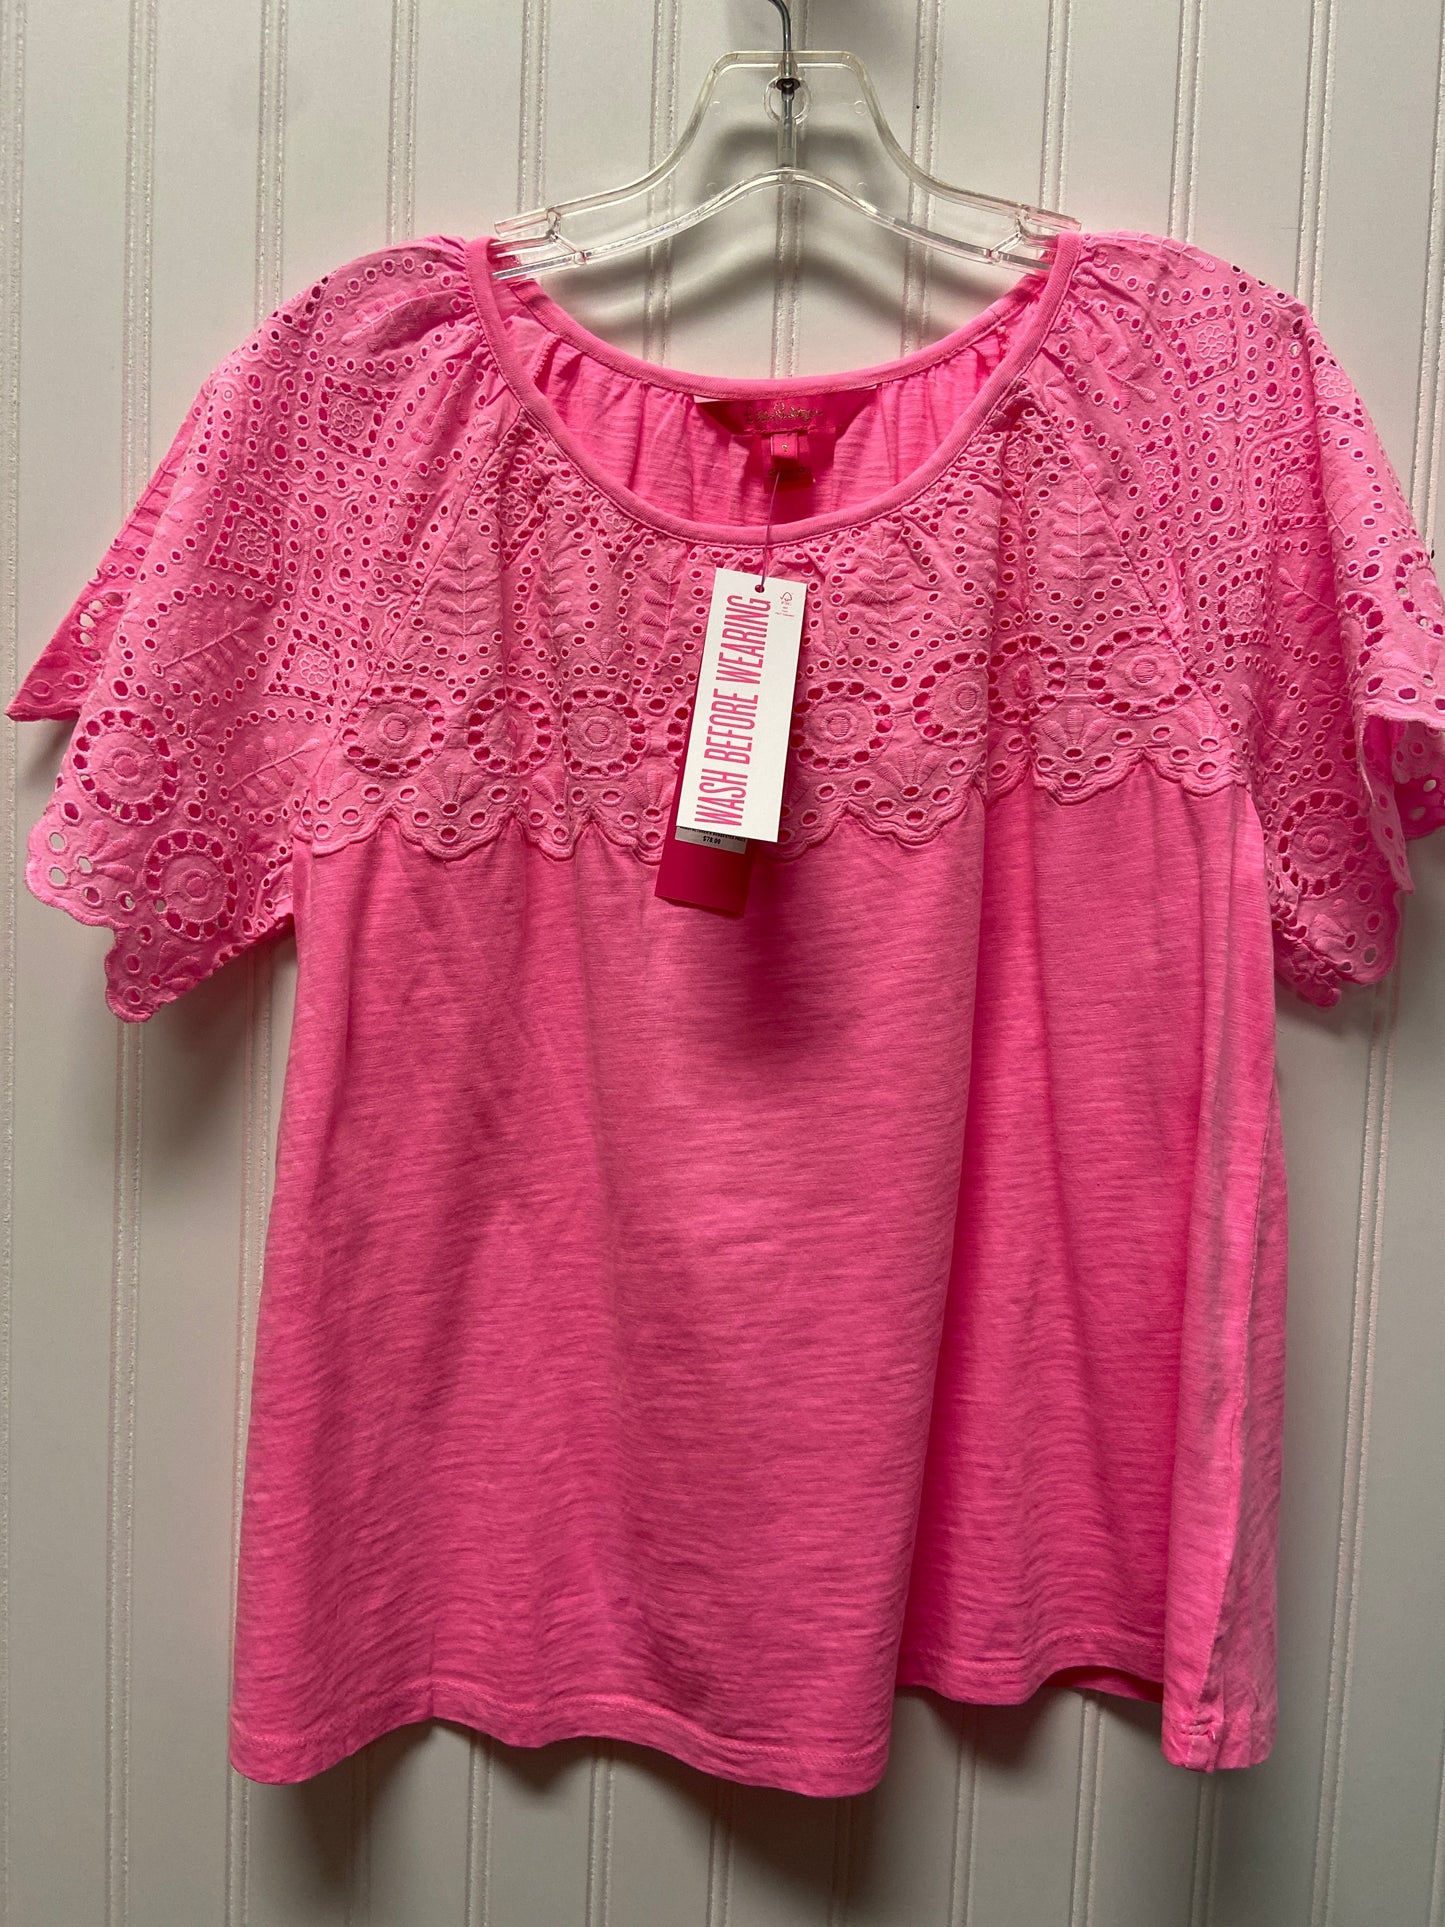 Pink Top Short Sleeve Designer Lilly Pulitzer, Size S